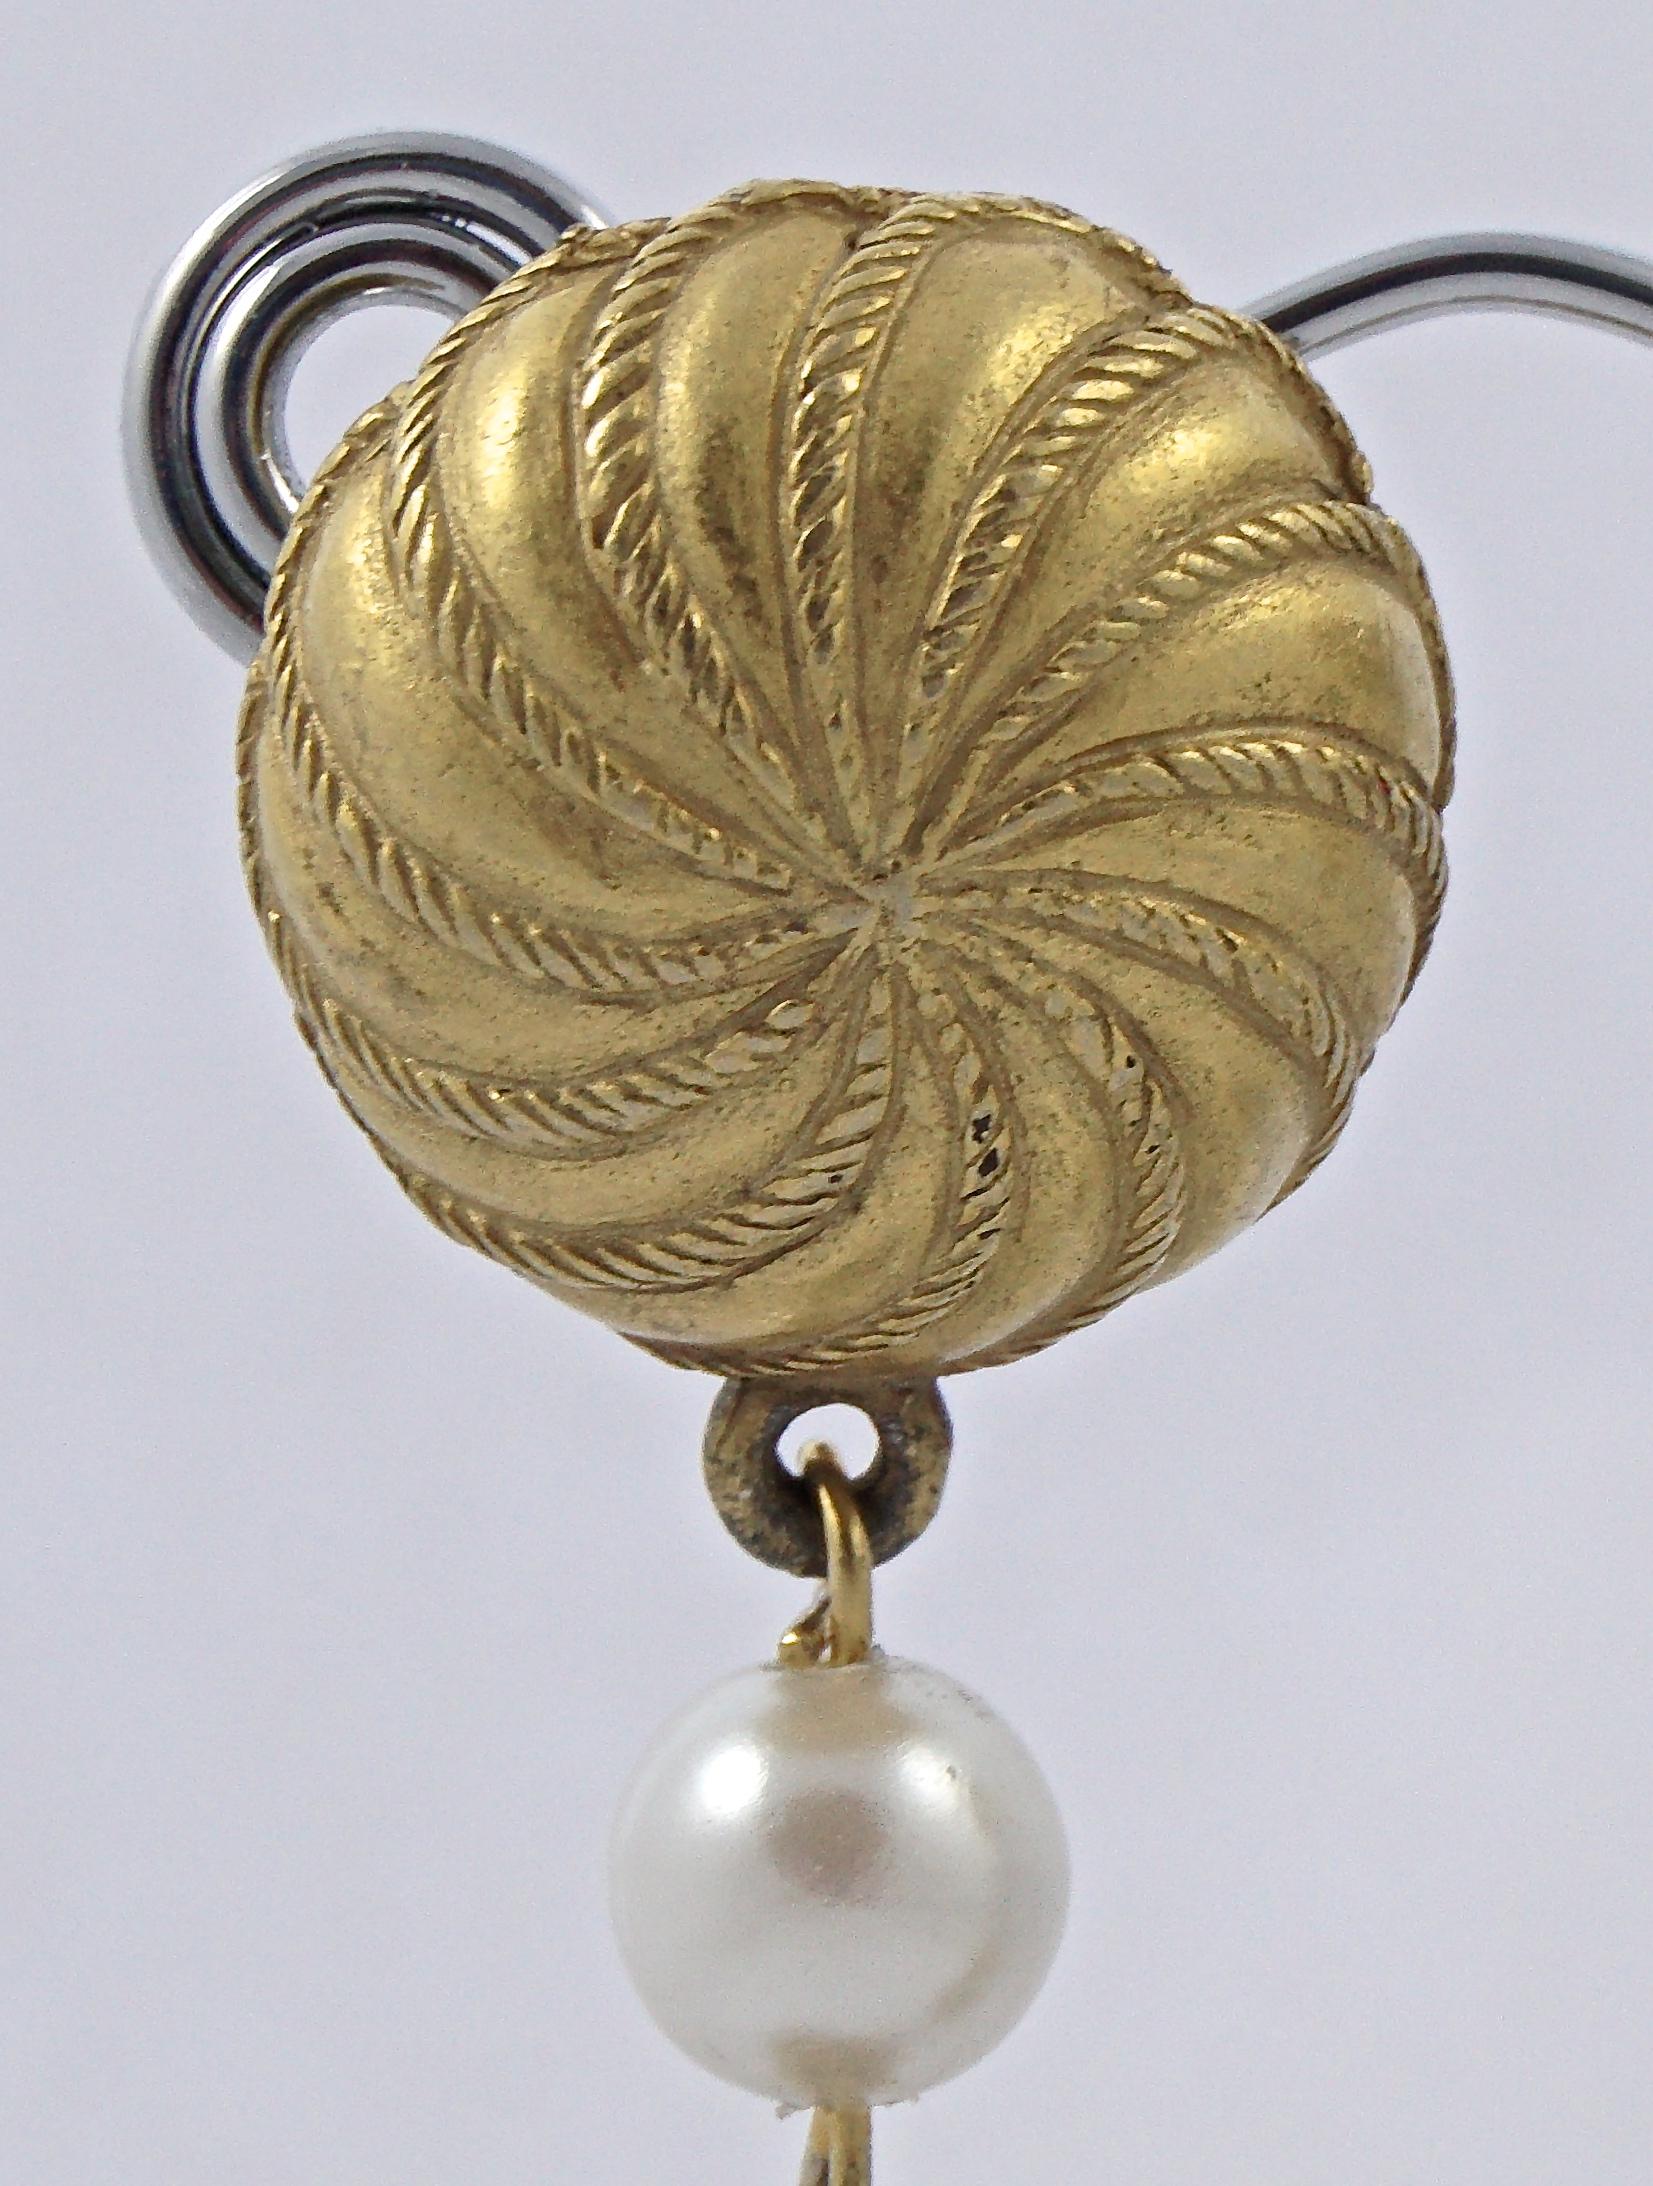 
Wonderful long pale gold plated drop clip on earrings, featuring a lovely rope twist swirl design, and white faux pearls. Circa 1970s. Measuring length 8.9cm / 3.5 inches, and the drop is width 2.55cm / 1 inch. There is some wear to the gold